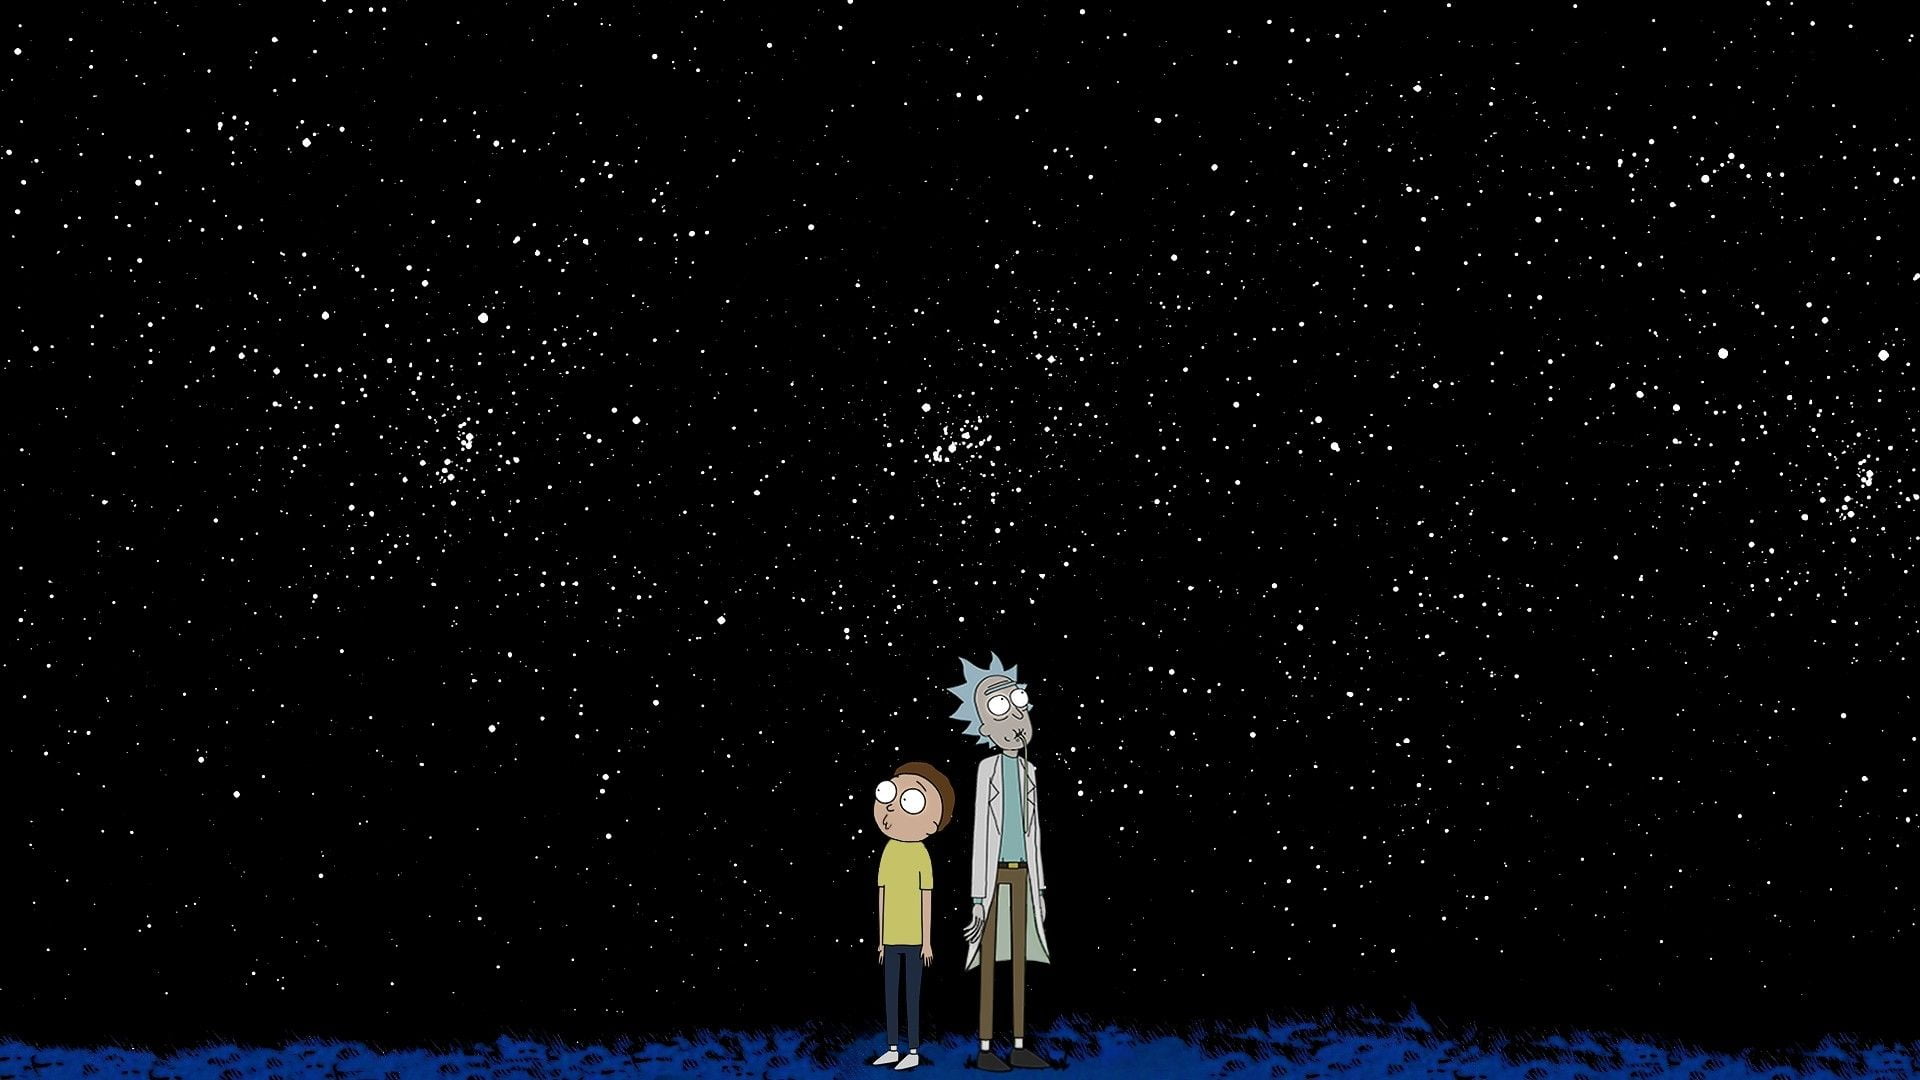 high quality Rick and Morty wallpaper